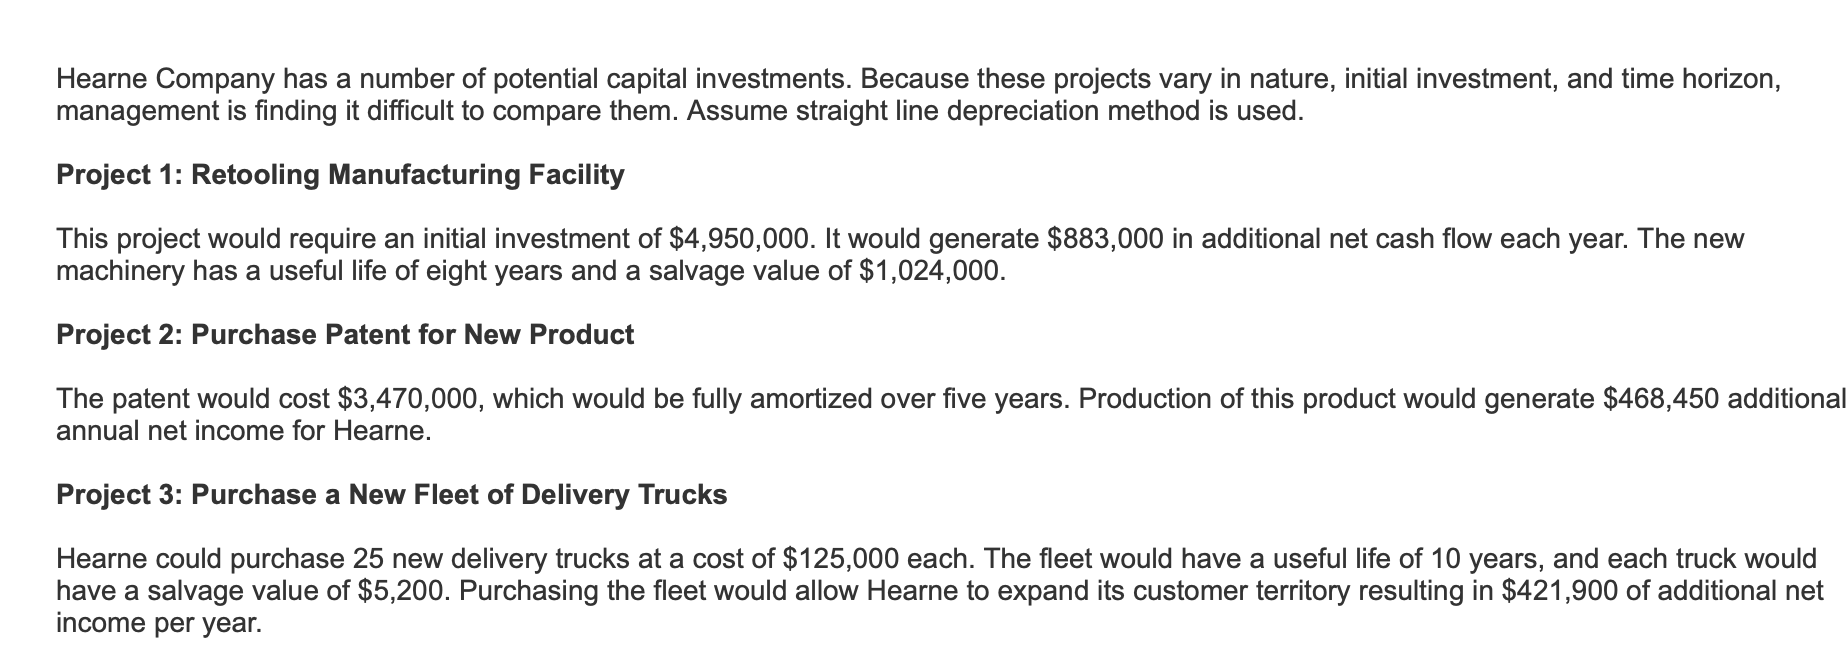 Hearne Company has a number of potential capital investments. Because these projects vary in nature, initial investment, and time horizon,
management is finding it difficult to compare them. Assume straight line depreciation method is used
Project 1: Retooling Manufacturing Facility
This project would require an initial investment of $4,950,000. It would generate $883,000 in additional net cash flow each year. The new
machinery has a useful life of eight years and a salvage value of $1,024,000.
Project 2: Purchase Patent for New Product
The patent would cost $3,470,000, which would be fully amortized over five years. Production of this product would generate $468,450 additional
annual net income for Hearne.
Project 3: Purchase a New Fleet of Delivery Trucks
Hearne could purchase 25 new delivery trucks at a cost of $125,000 each. The fleet would have a useful life of 10 years, and each truck would
have a salvage value of $5,200. Purchasing the fleet would allow Hearne to expand its customer territory resulting in $421,900 of additional net
income per year.
